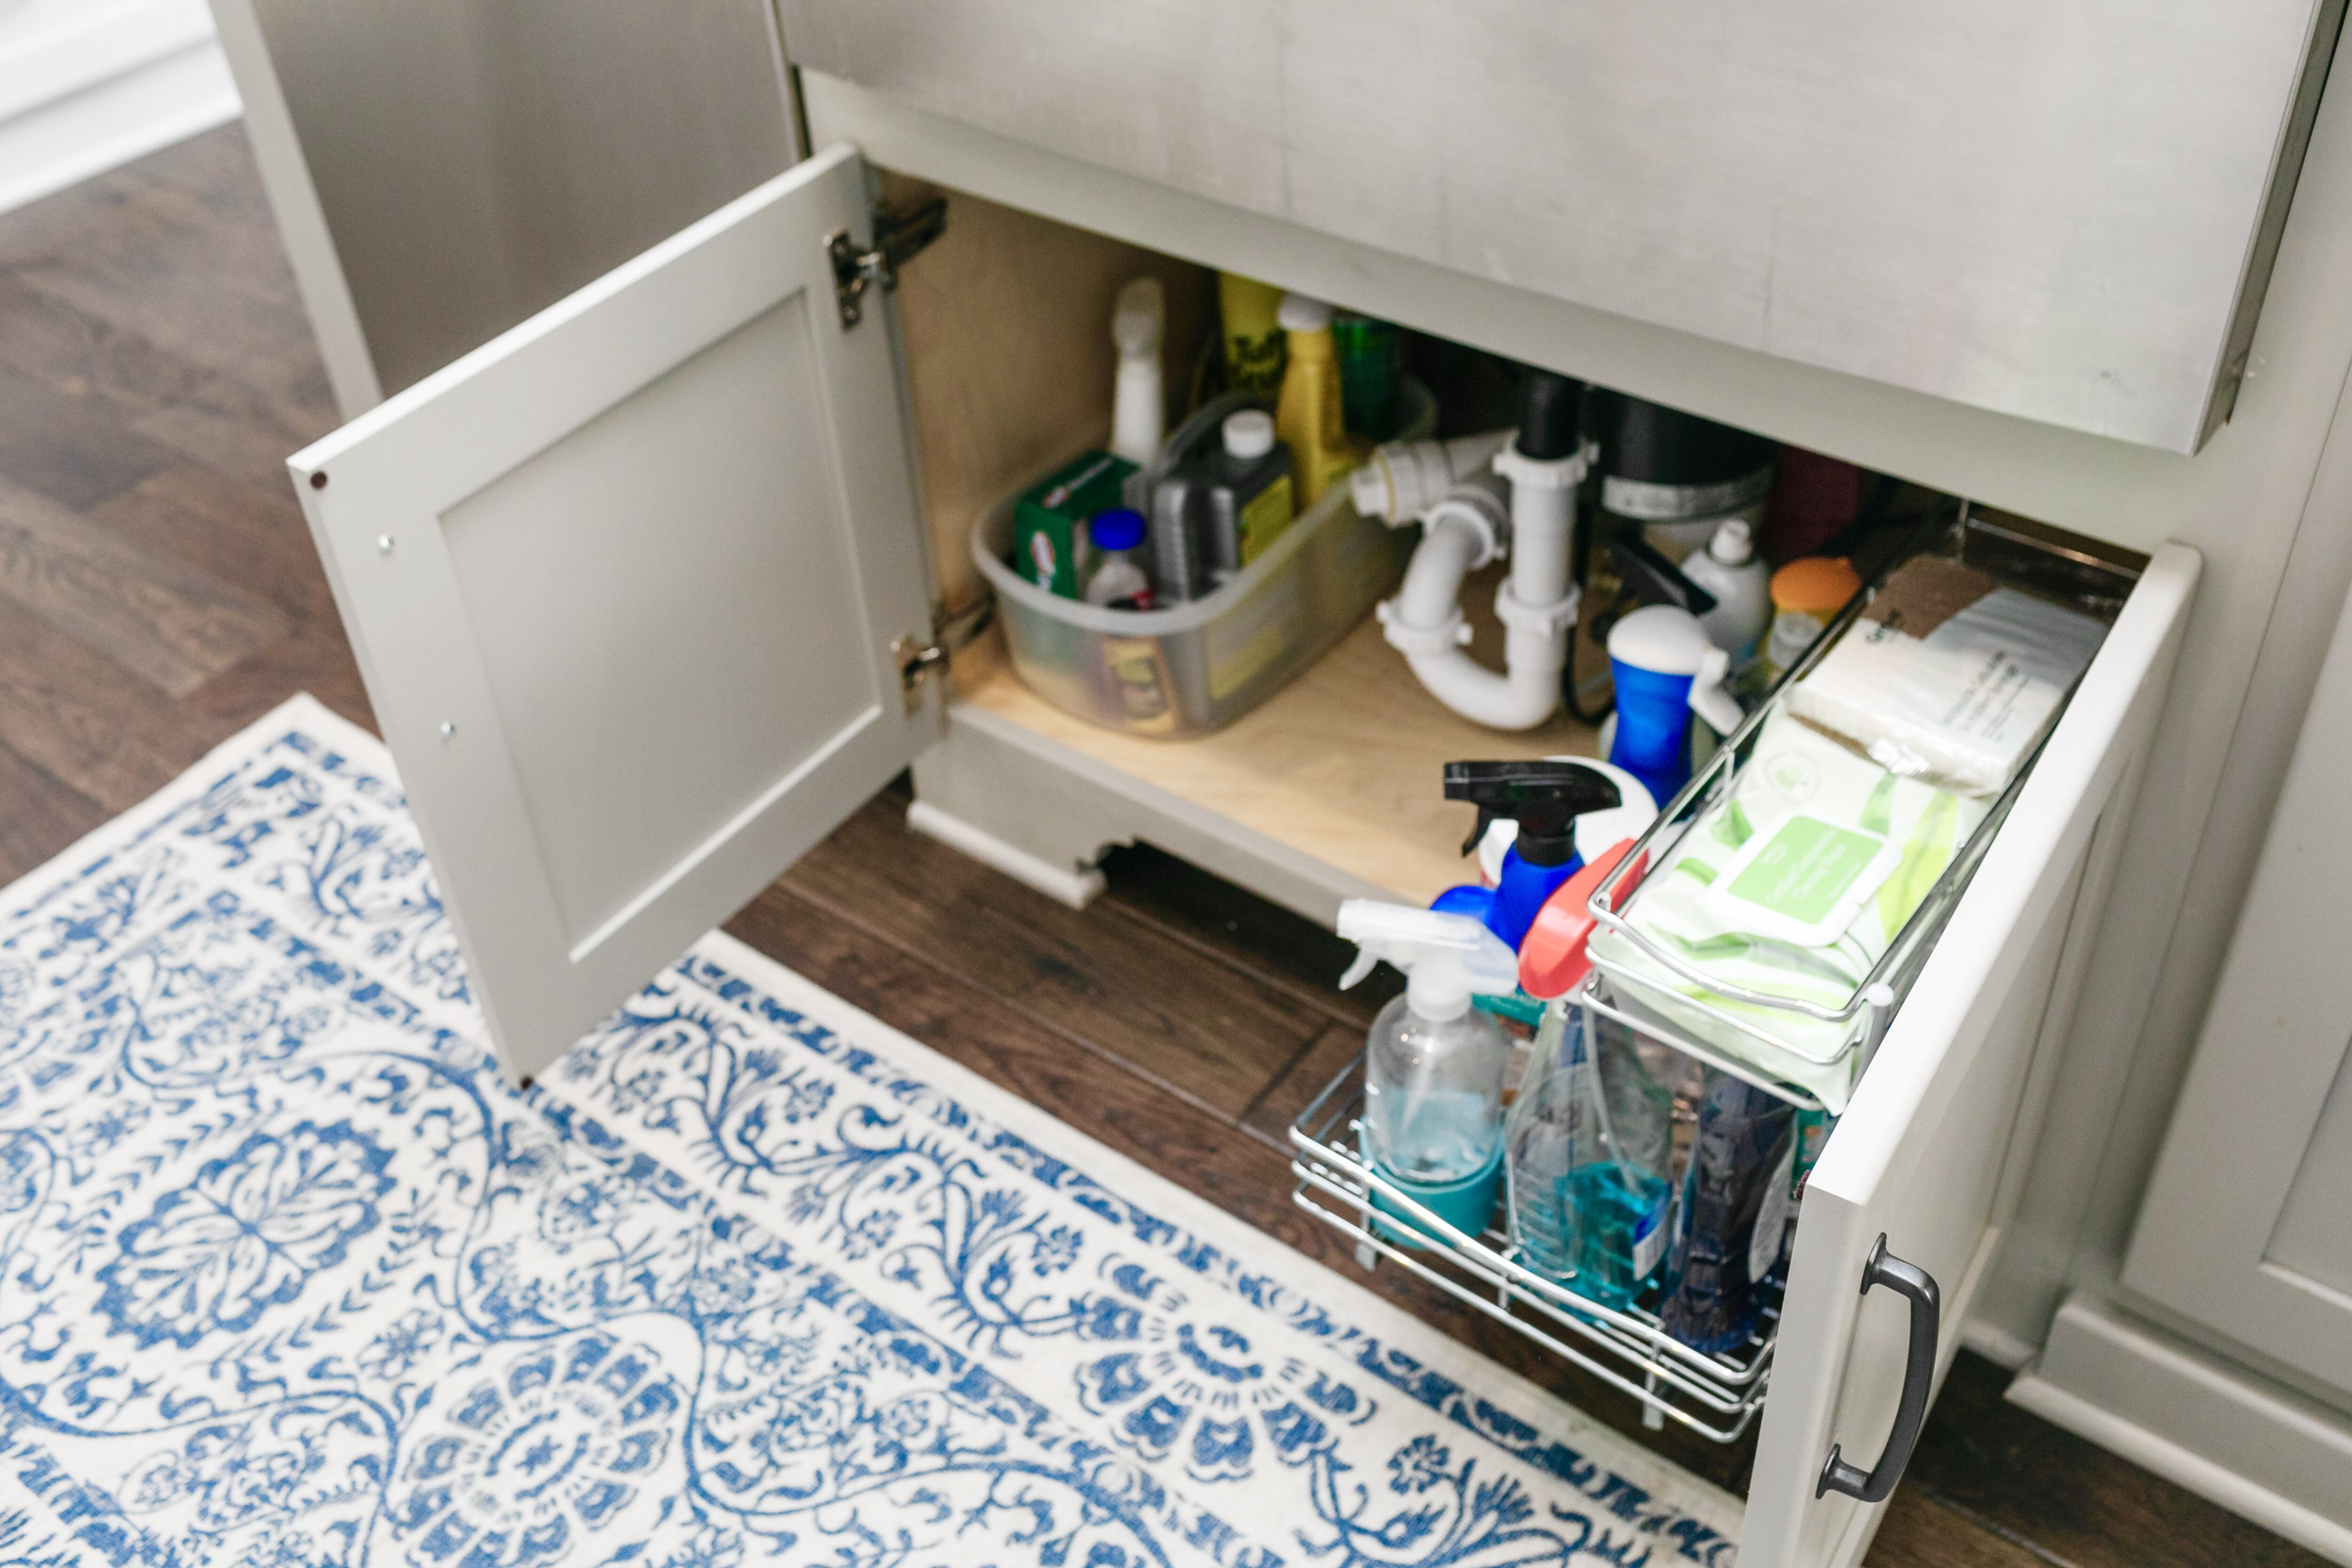 How to Organize Under Your Kitchen Sink, tips featured by top Memphis lifestyle blogger, Walking in Memphis in High Heels.